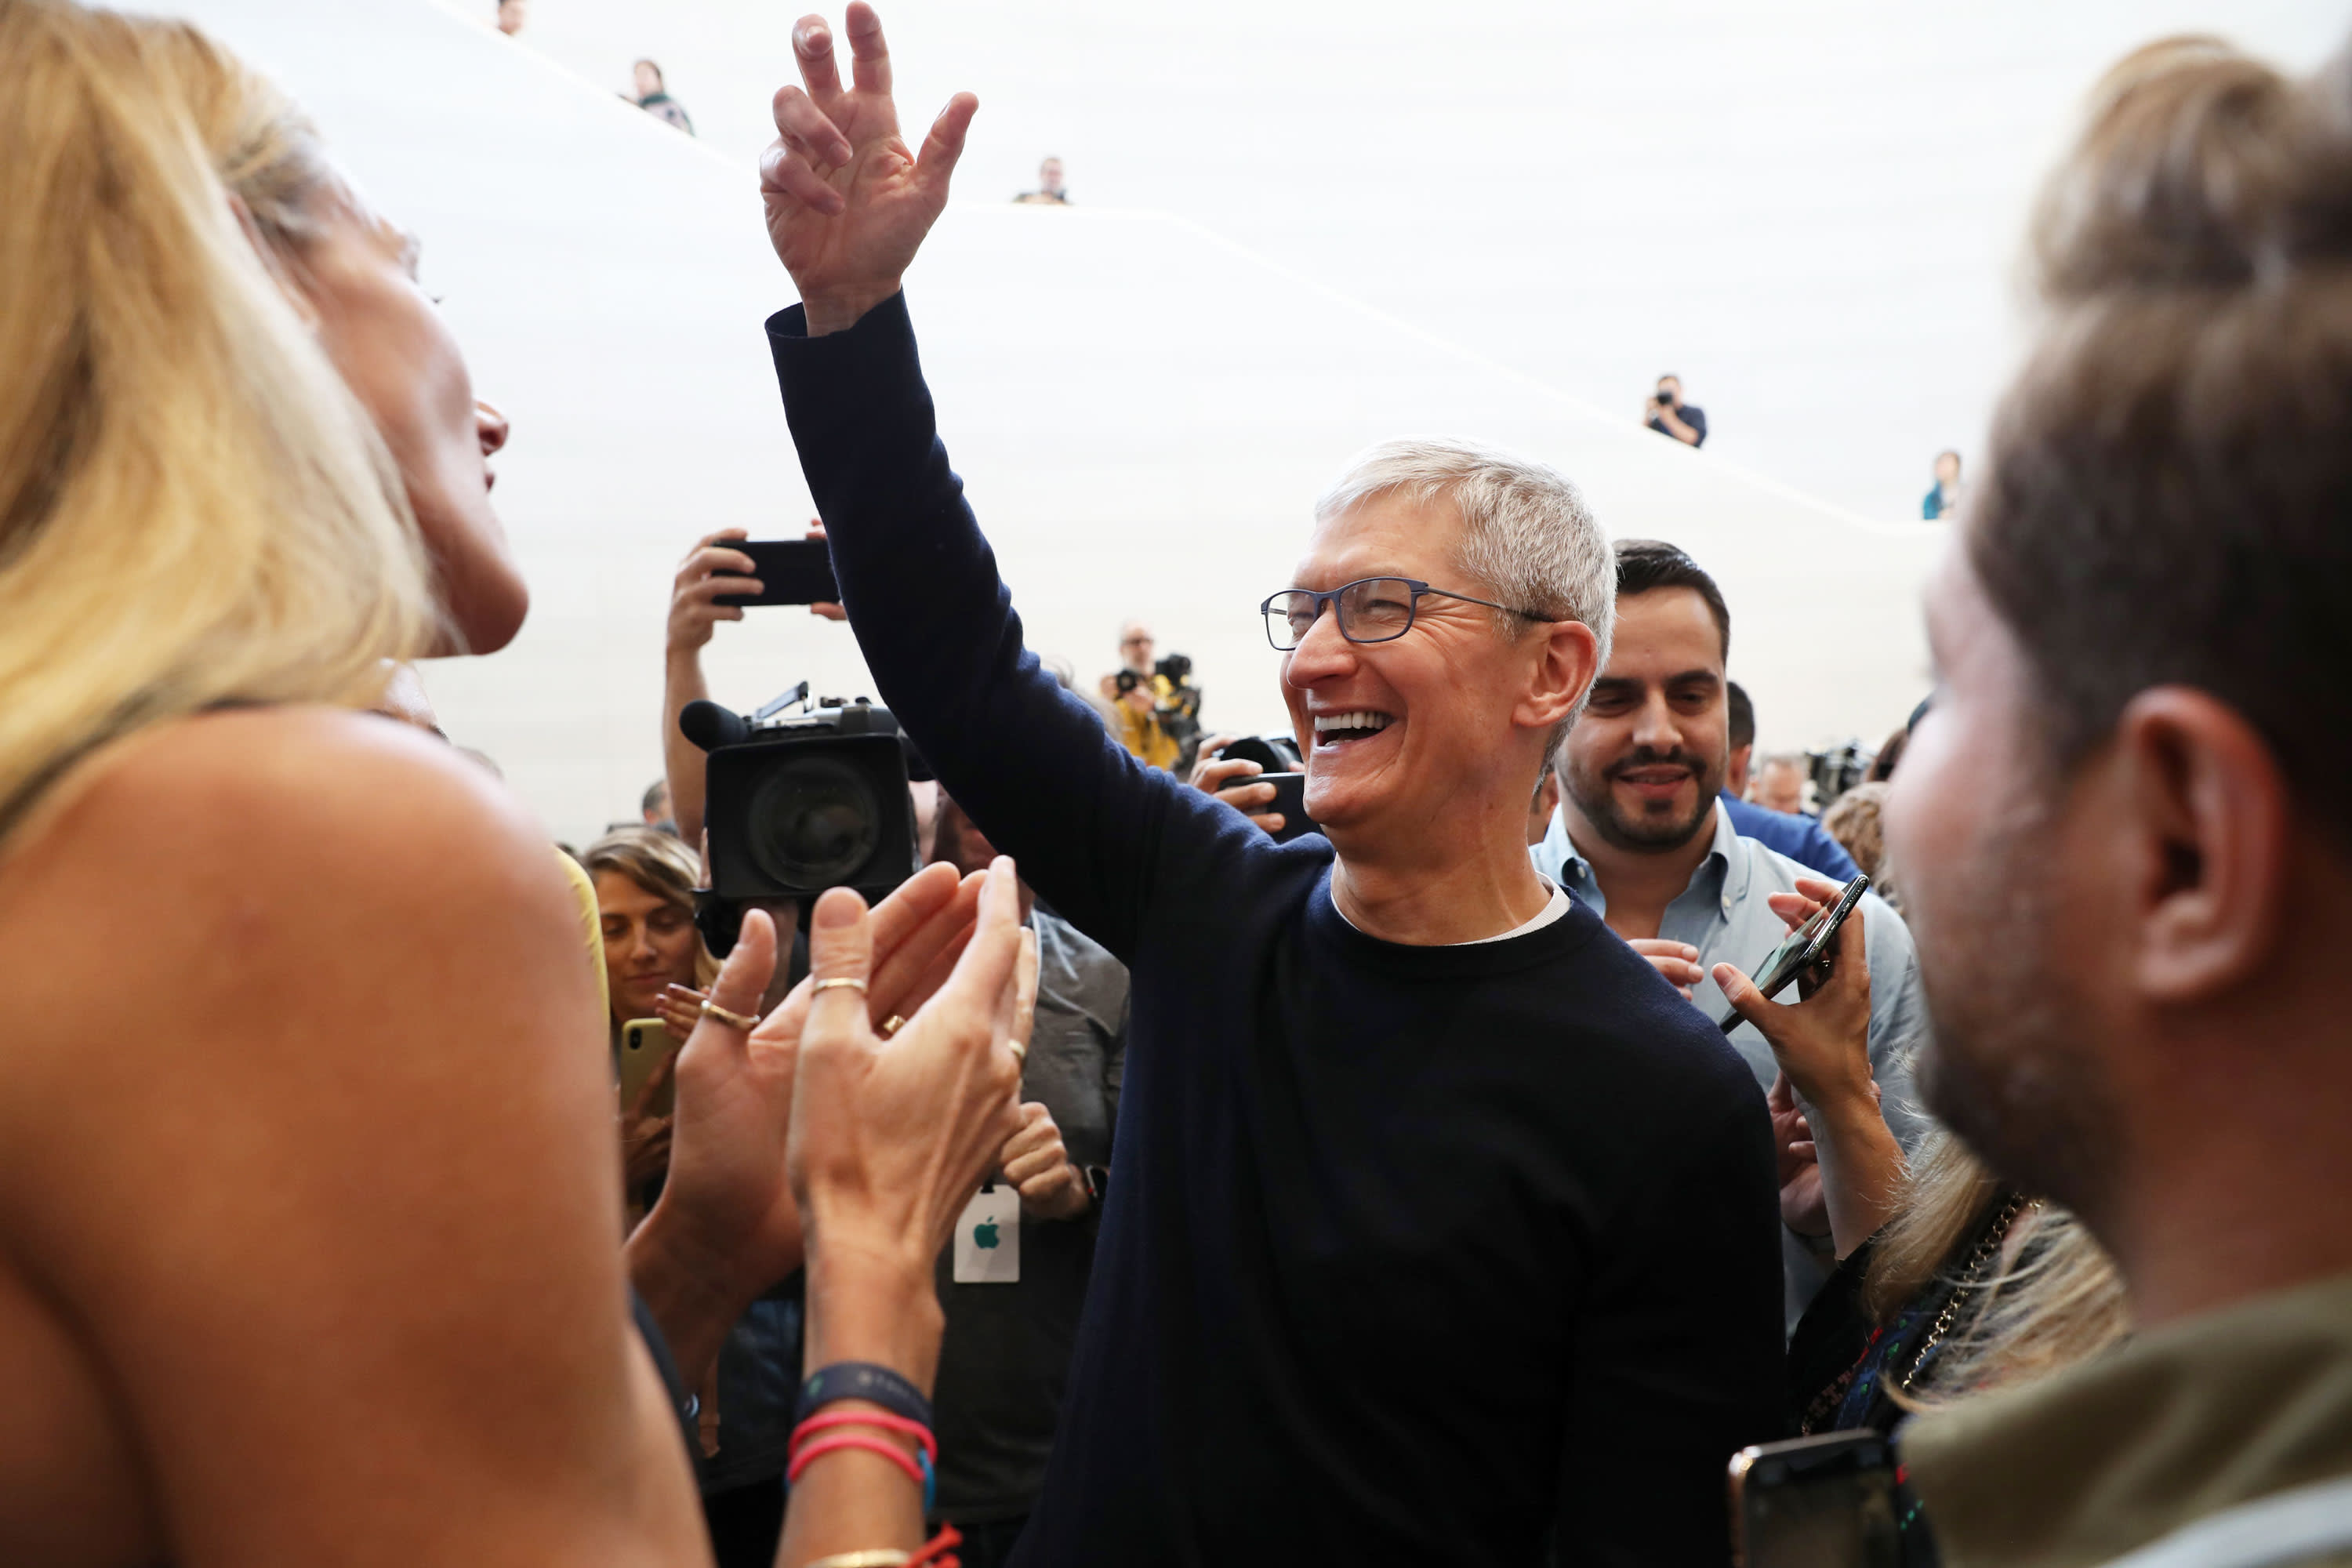 Apple surpasses Saudi Aramco to become world's most valuable company - CNBC